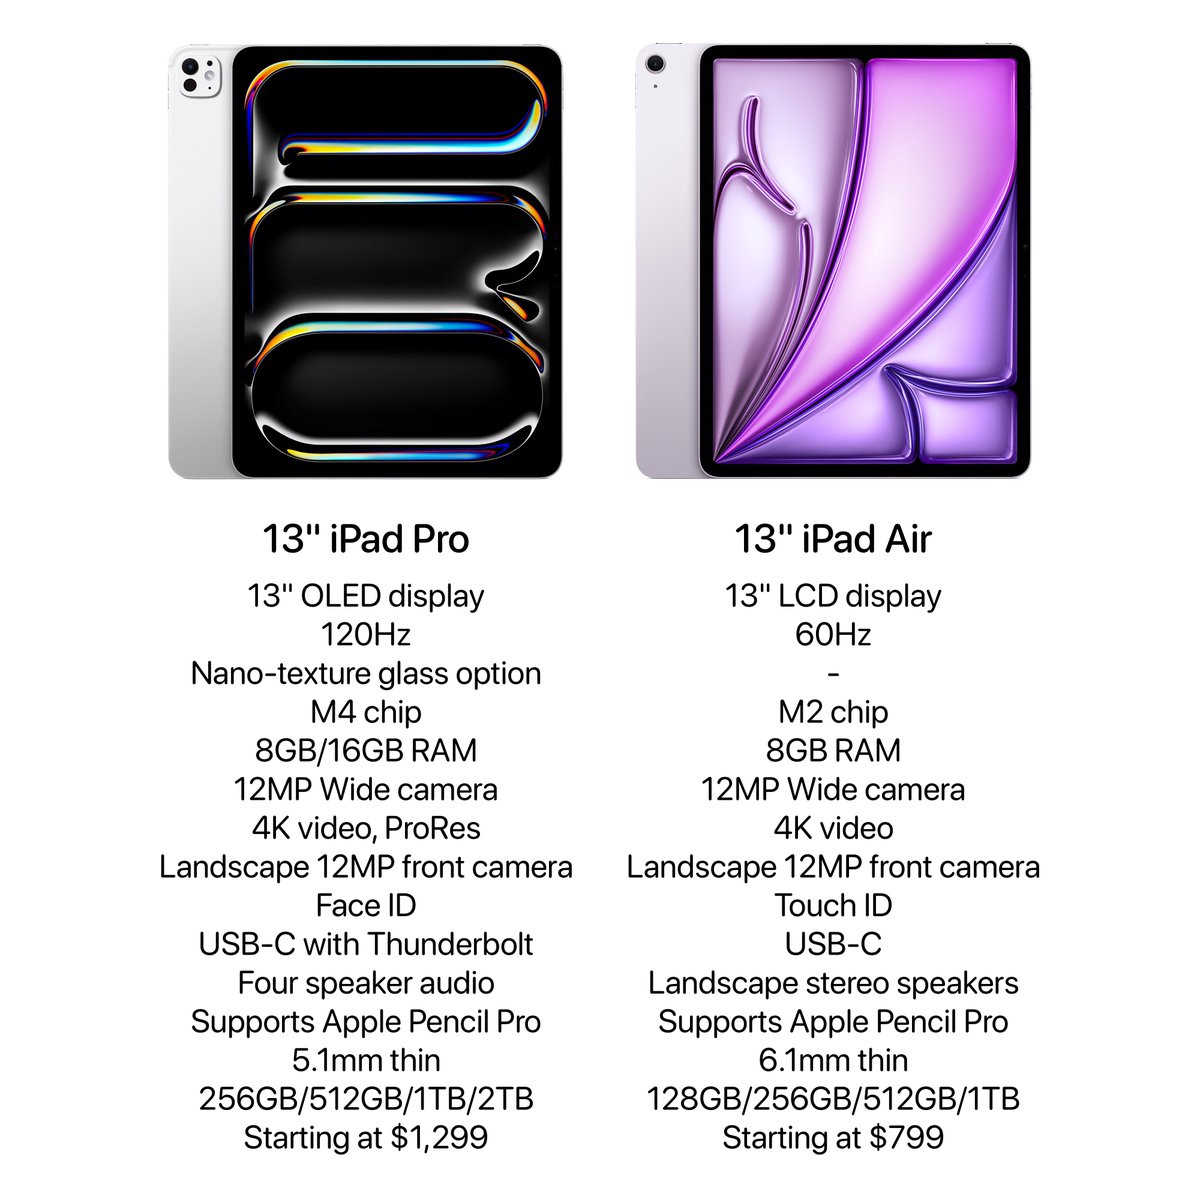 The new iPad Pro vs iPad Air Which one would you pick?